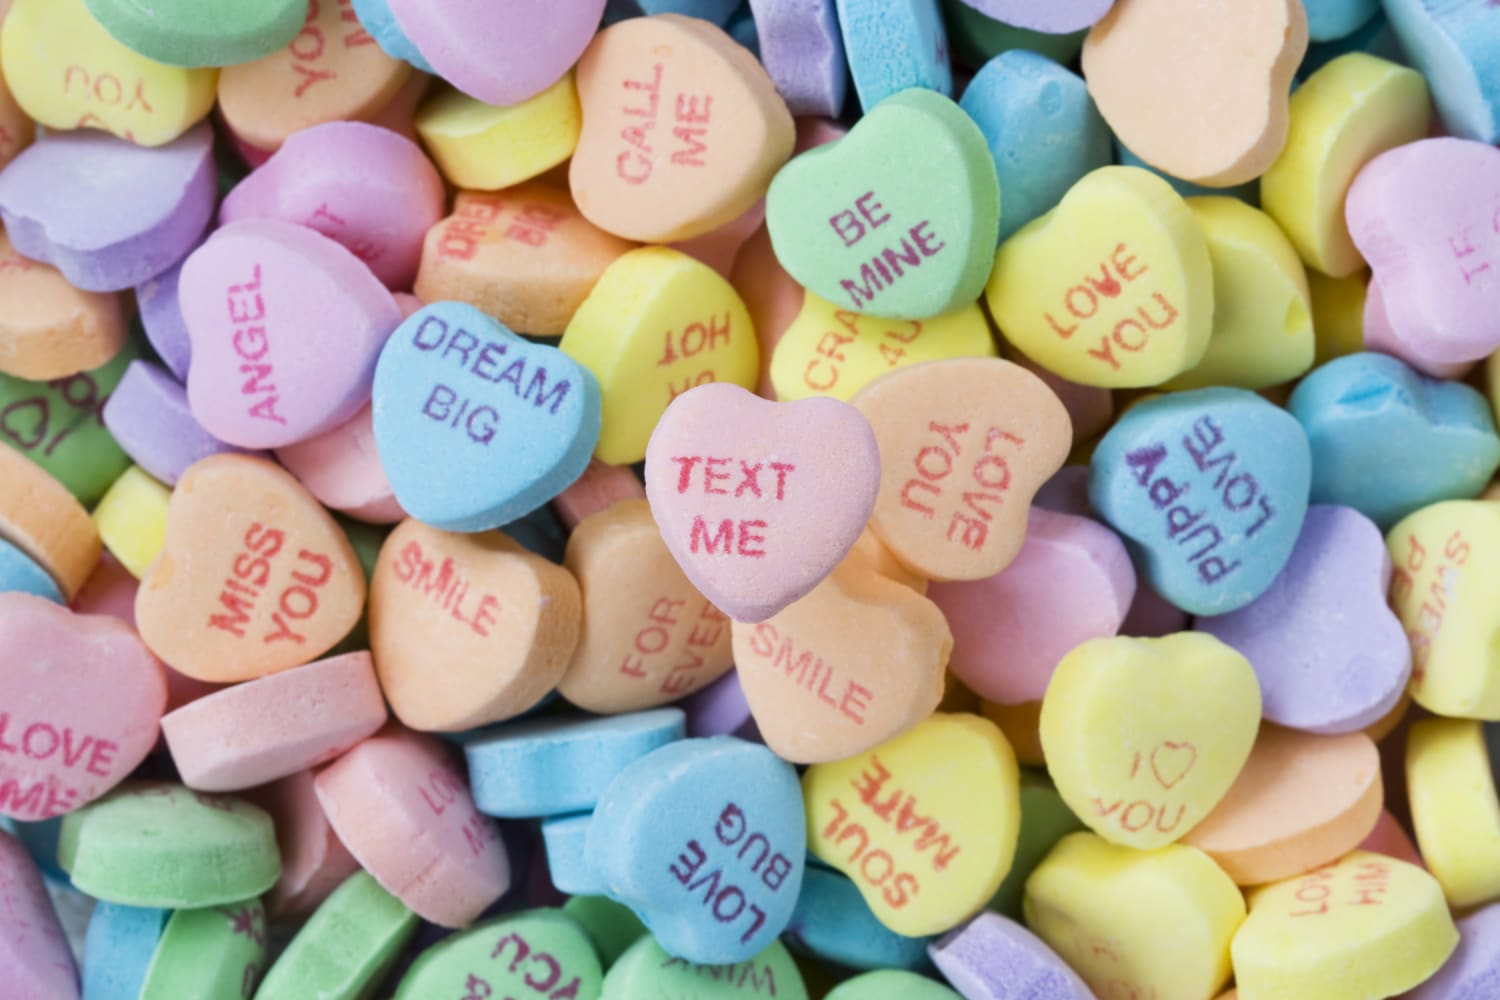 Sweethearts candy won't be available for Valentine's 2019